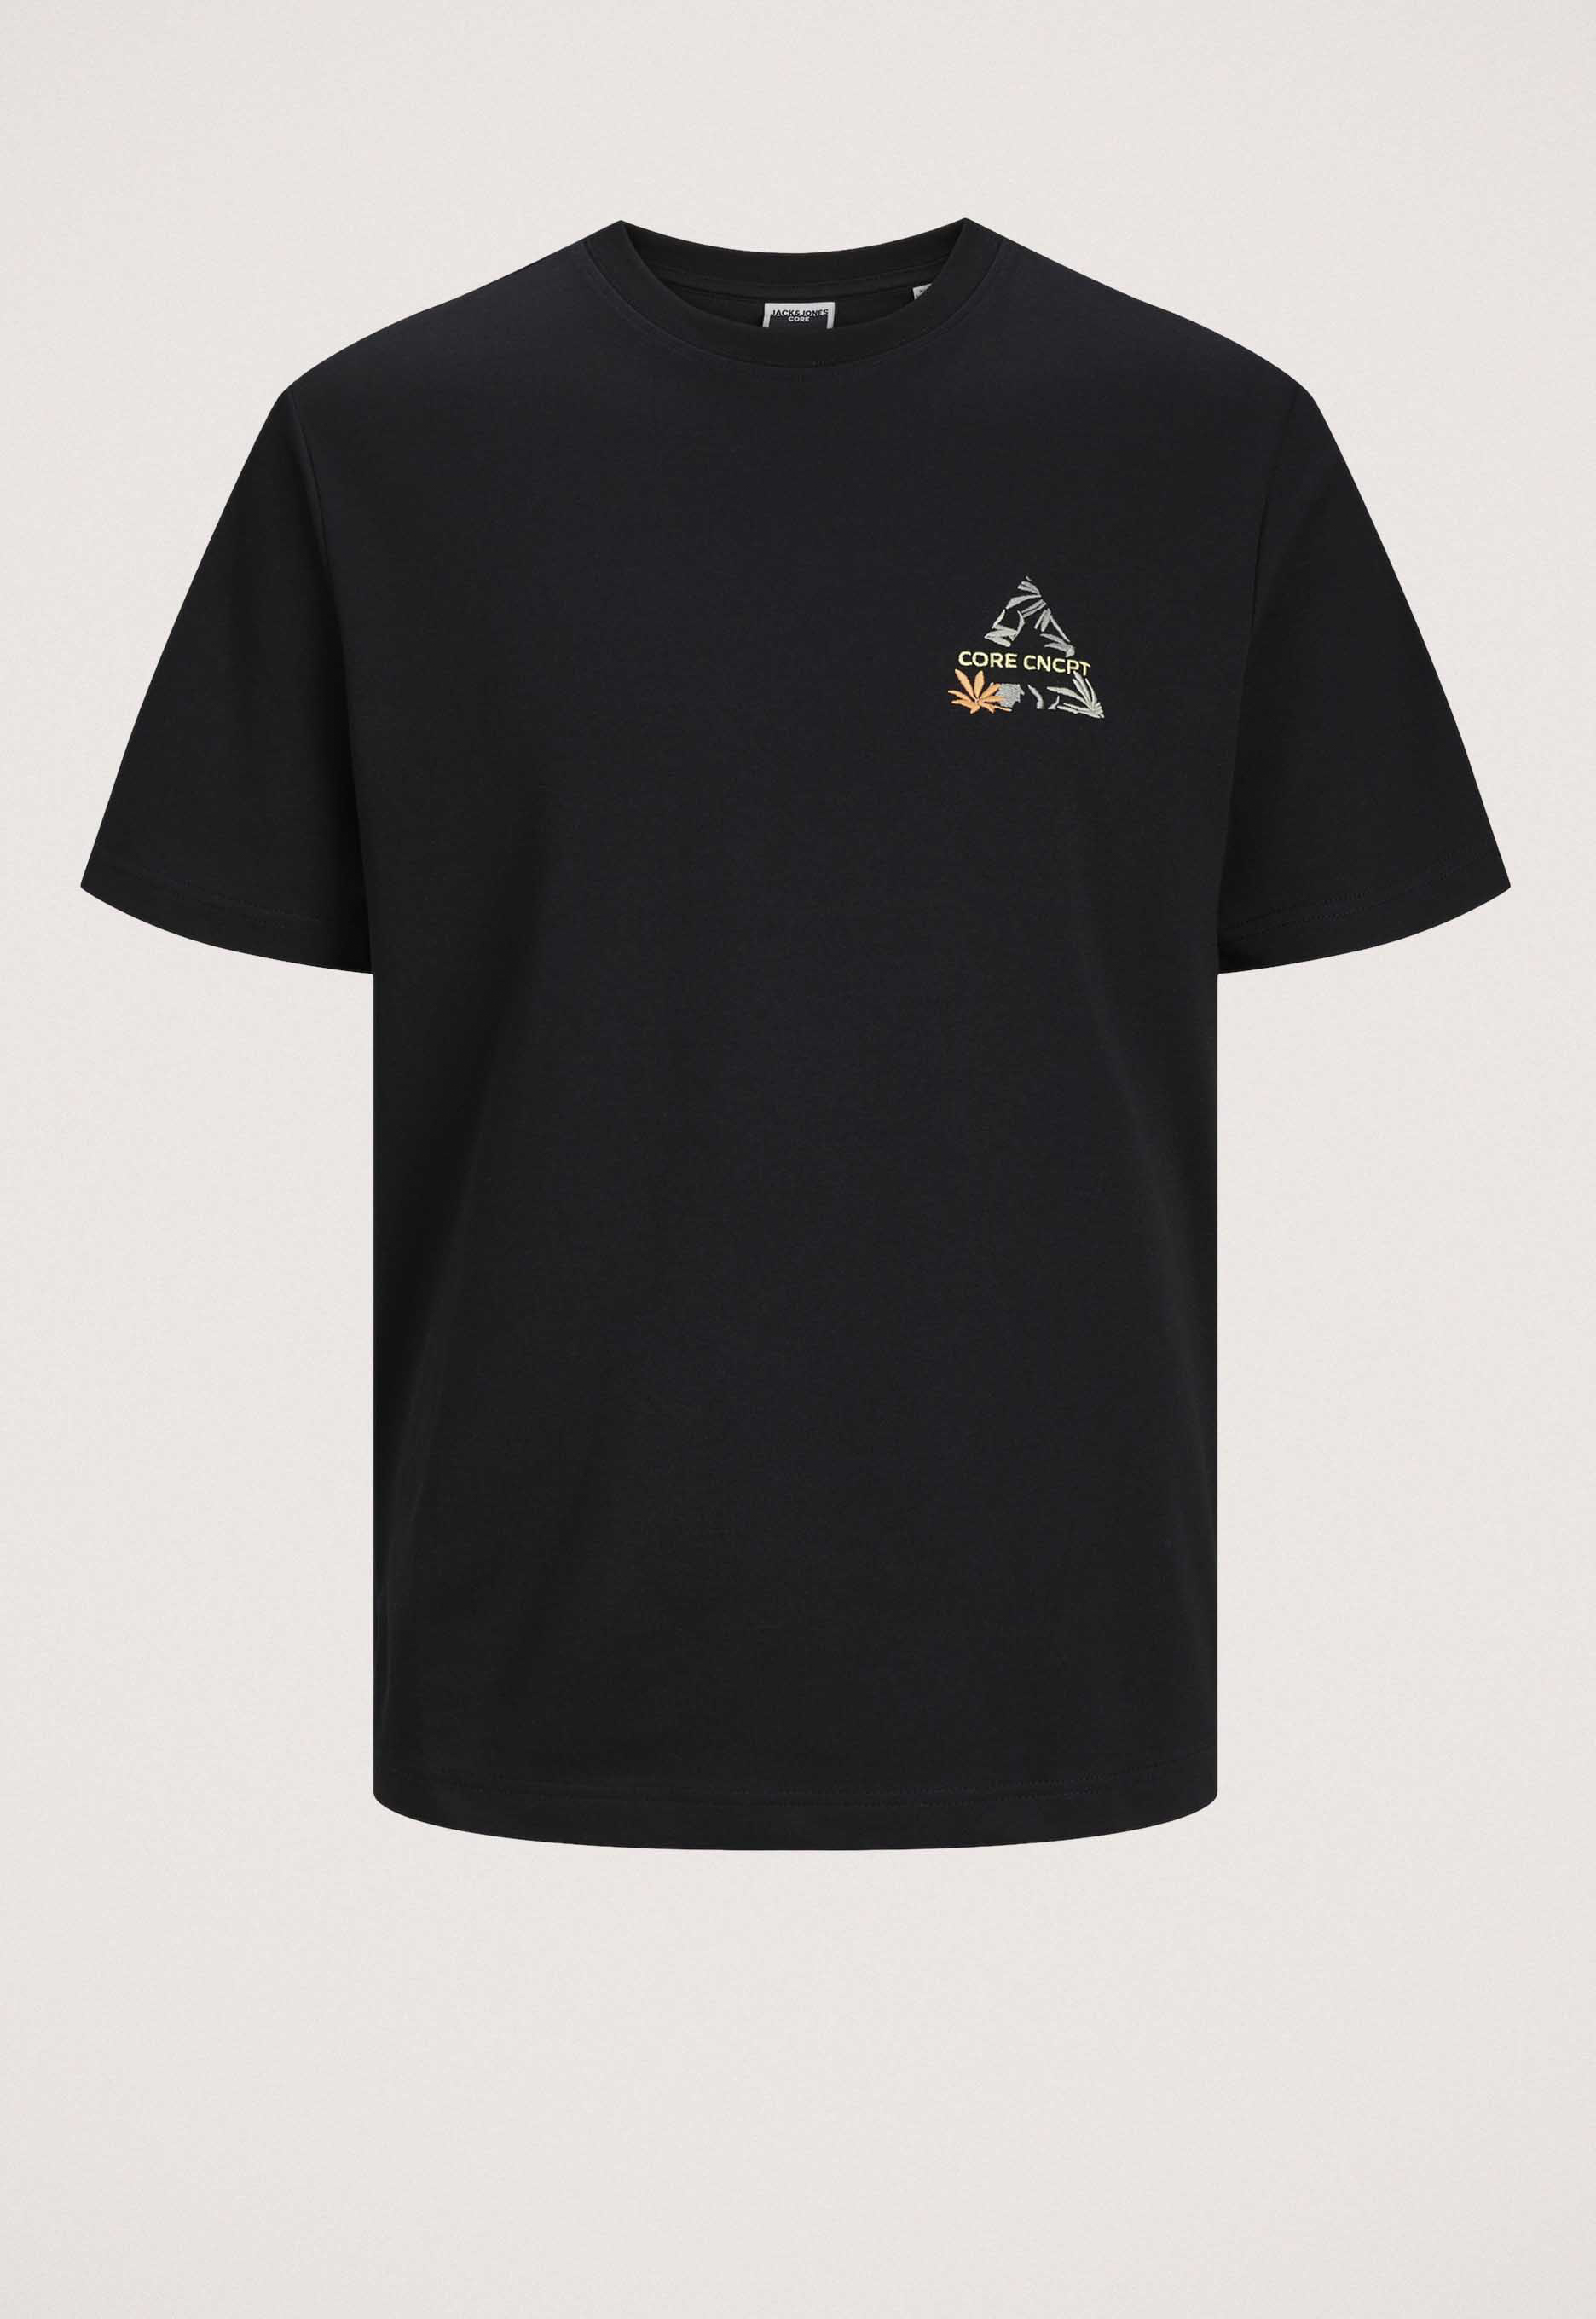 Jack&Jones Stagger Embroidery Crew T-shirt